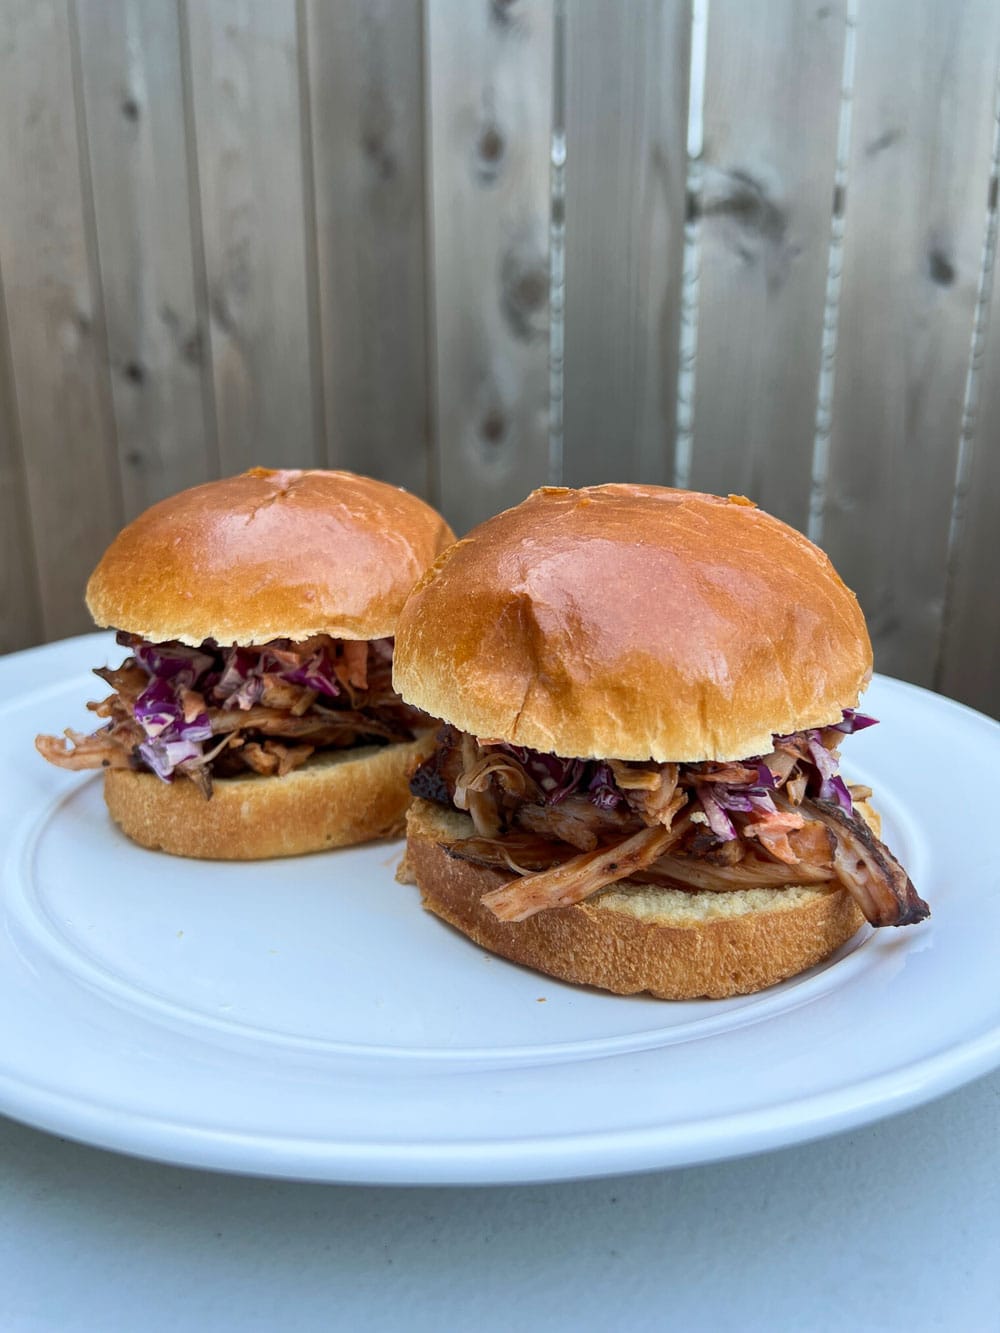 Hickory smoked pulled turkey sandwiches, Fourth of July grilling recipes, inspired by Great Smoky Mountains National Park